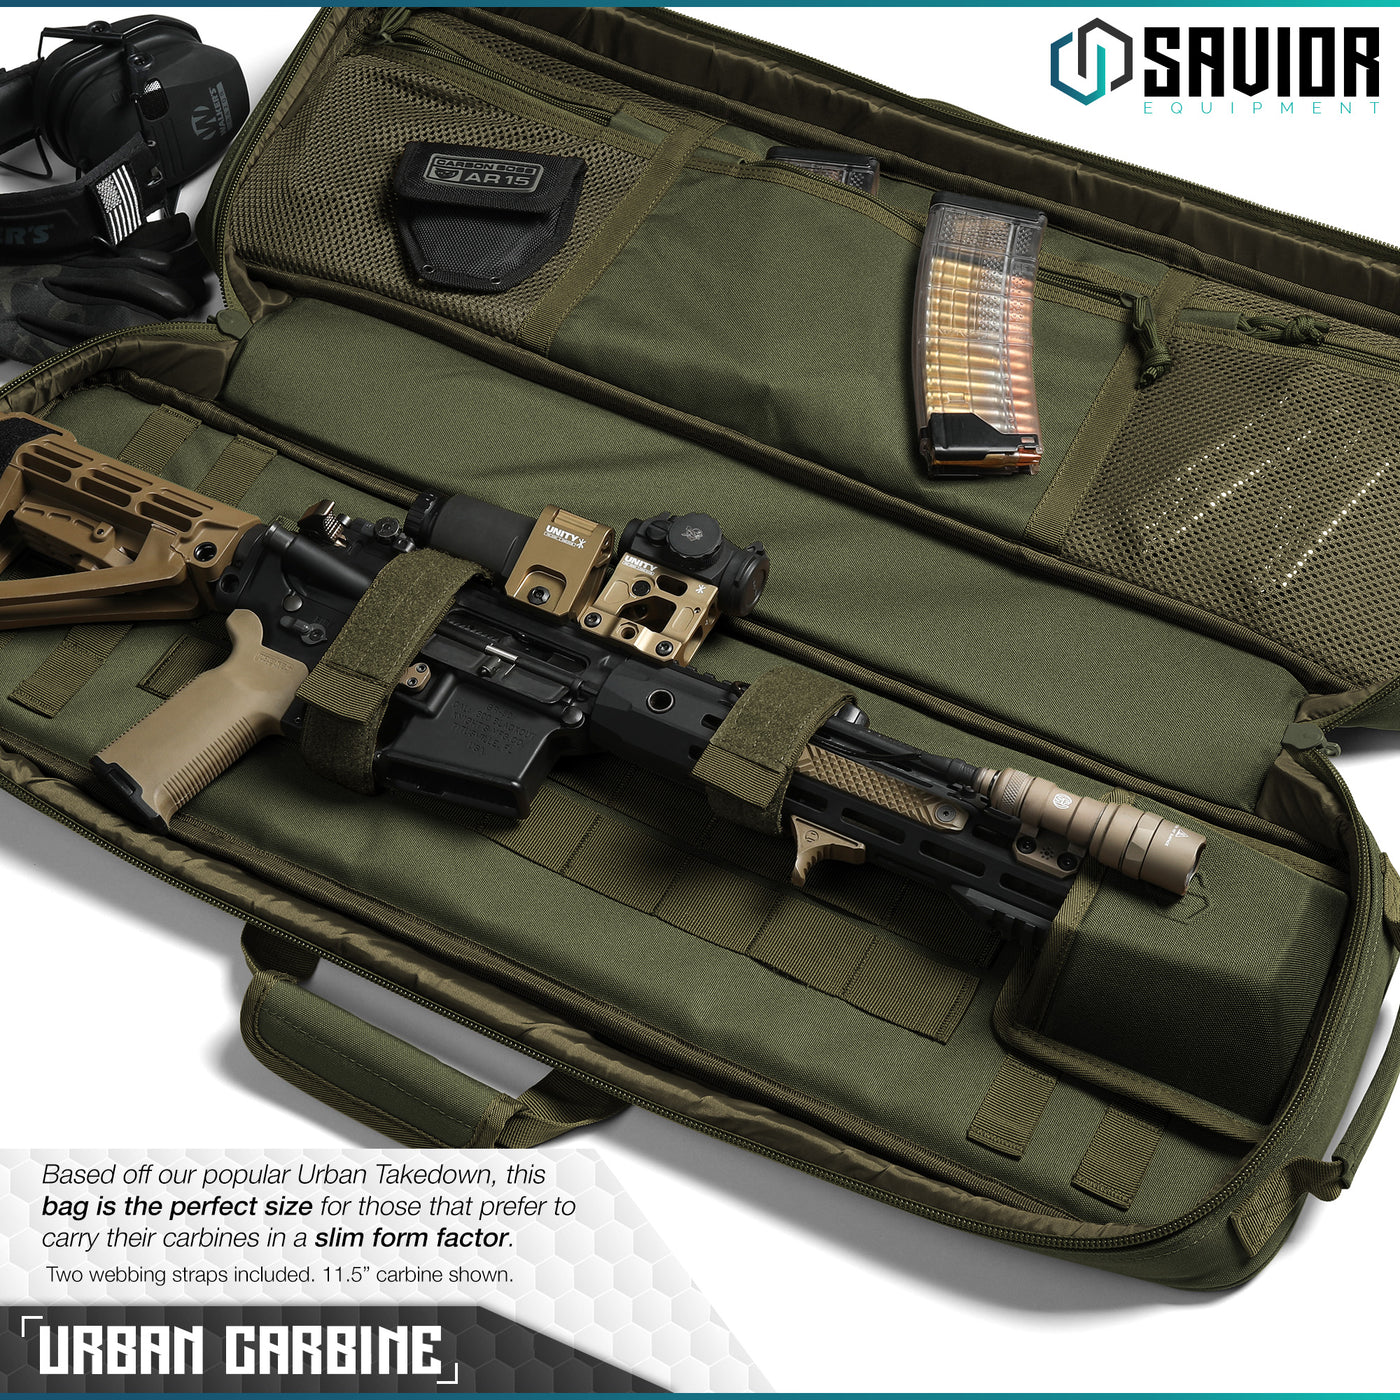 Urban Carbine - Based off our popular Urban Takedown, this bag is the perfect size for those that prefer to carry their carbines in a slim form factor. Two webbing straps included. 11.5" carbine shown.